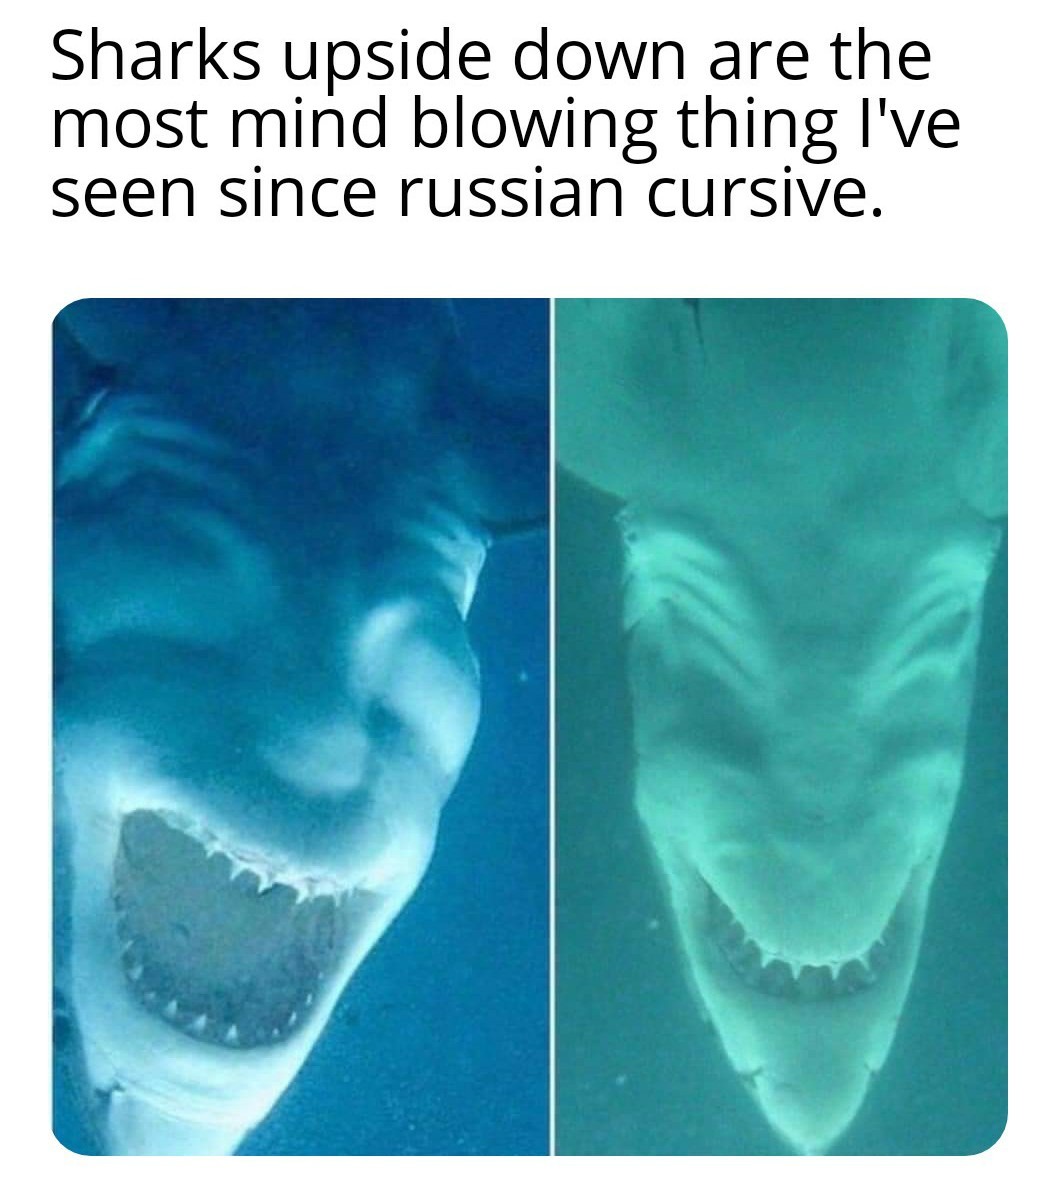 cool and funny pics - shark upside down - Sharks upside down are the most mind blowing thing I've seen since russian cursive.